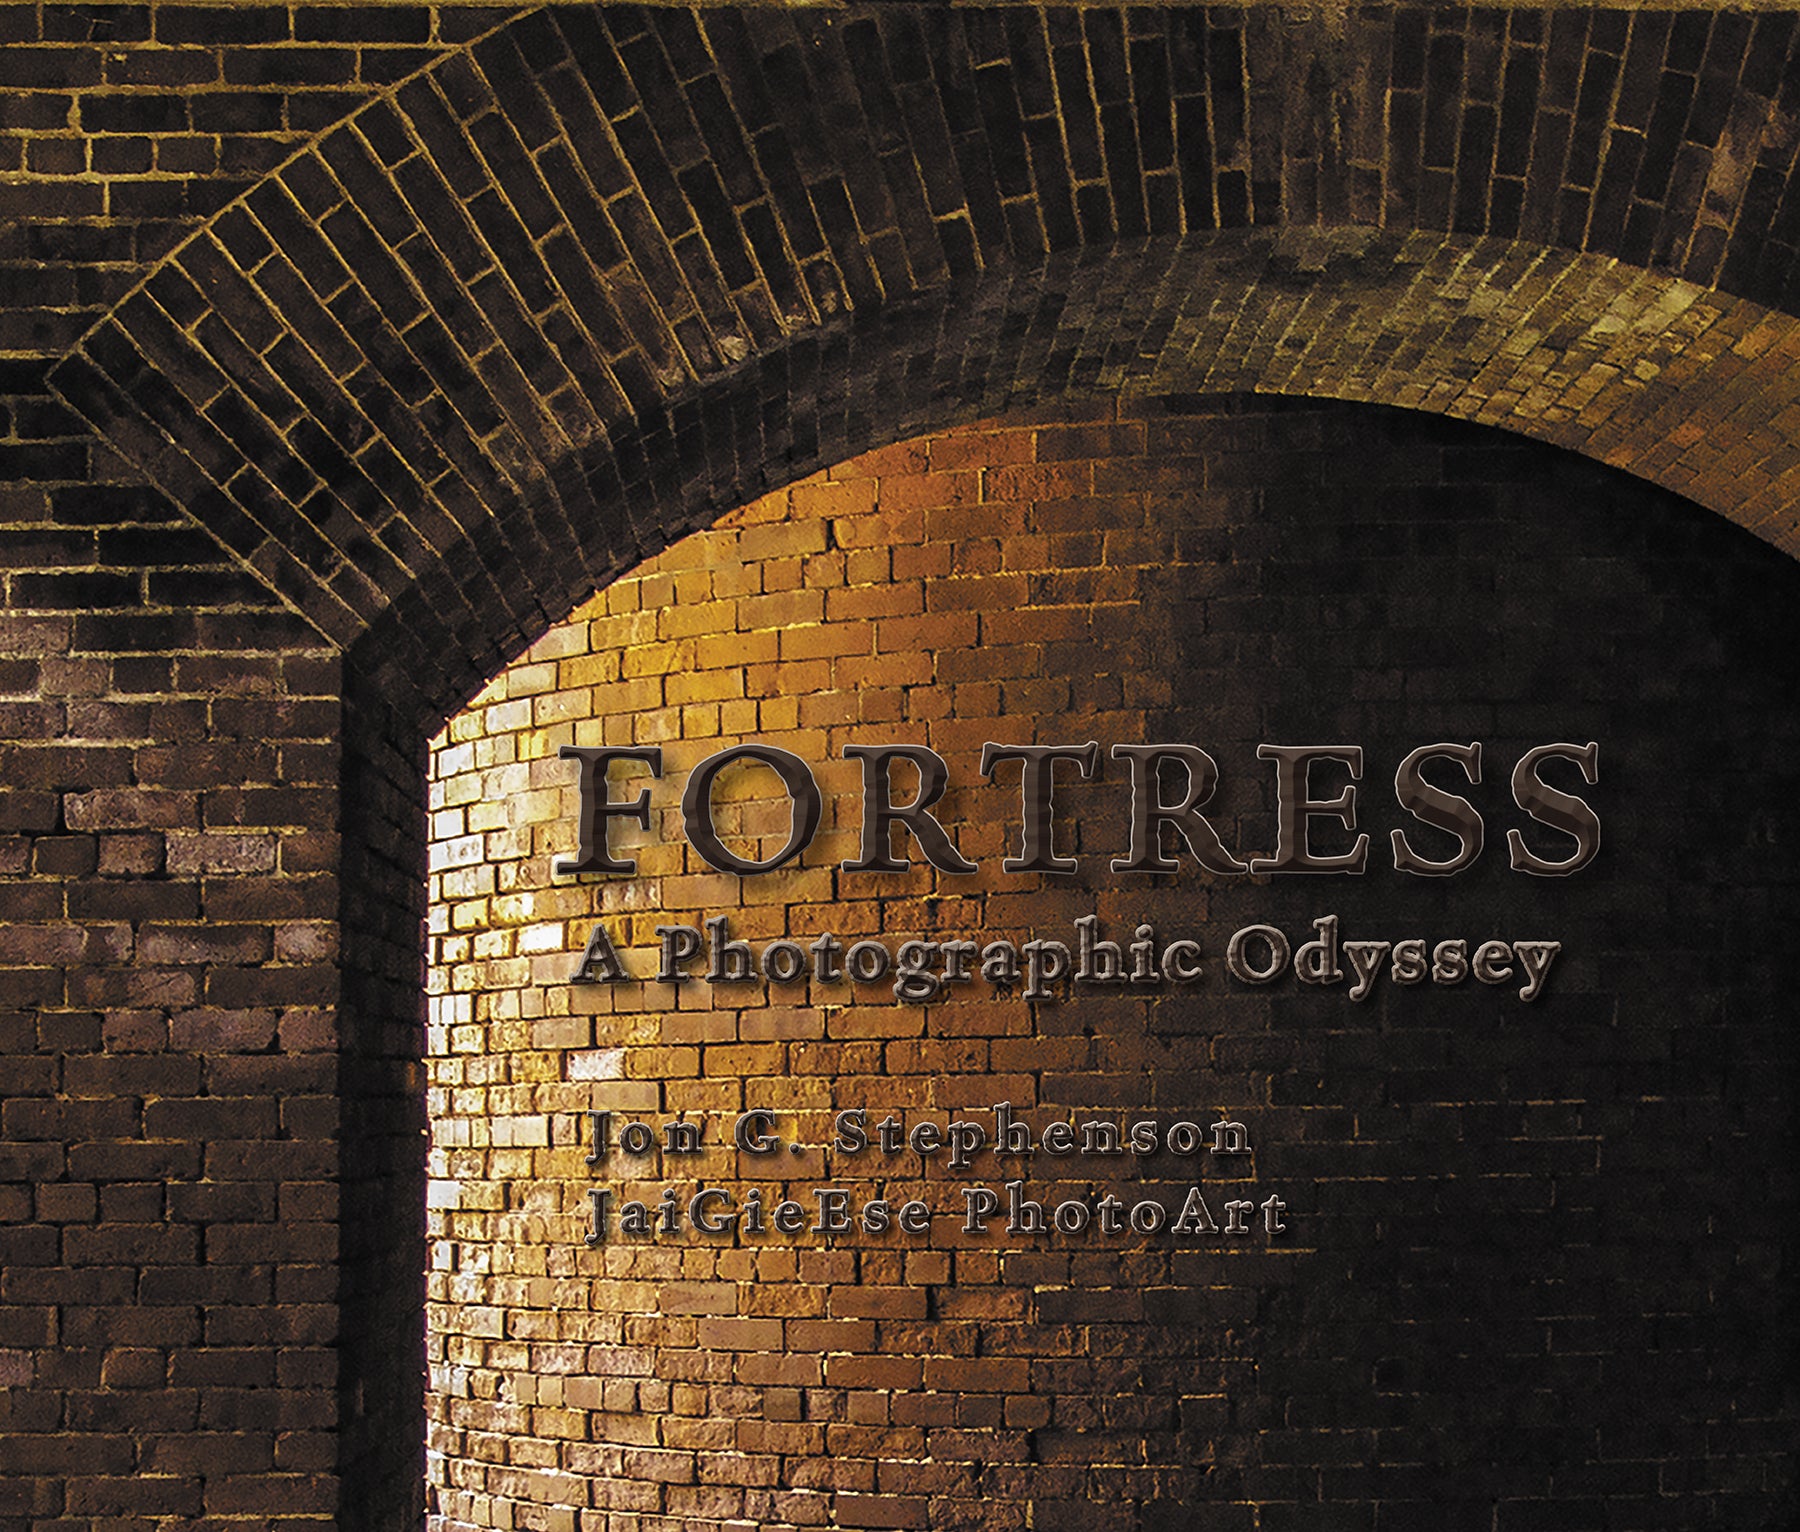 Fortress: A Photographic Odyssey released as eBook.